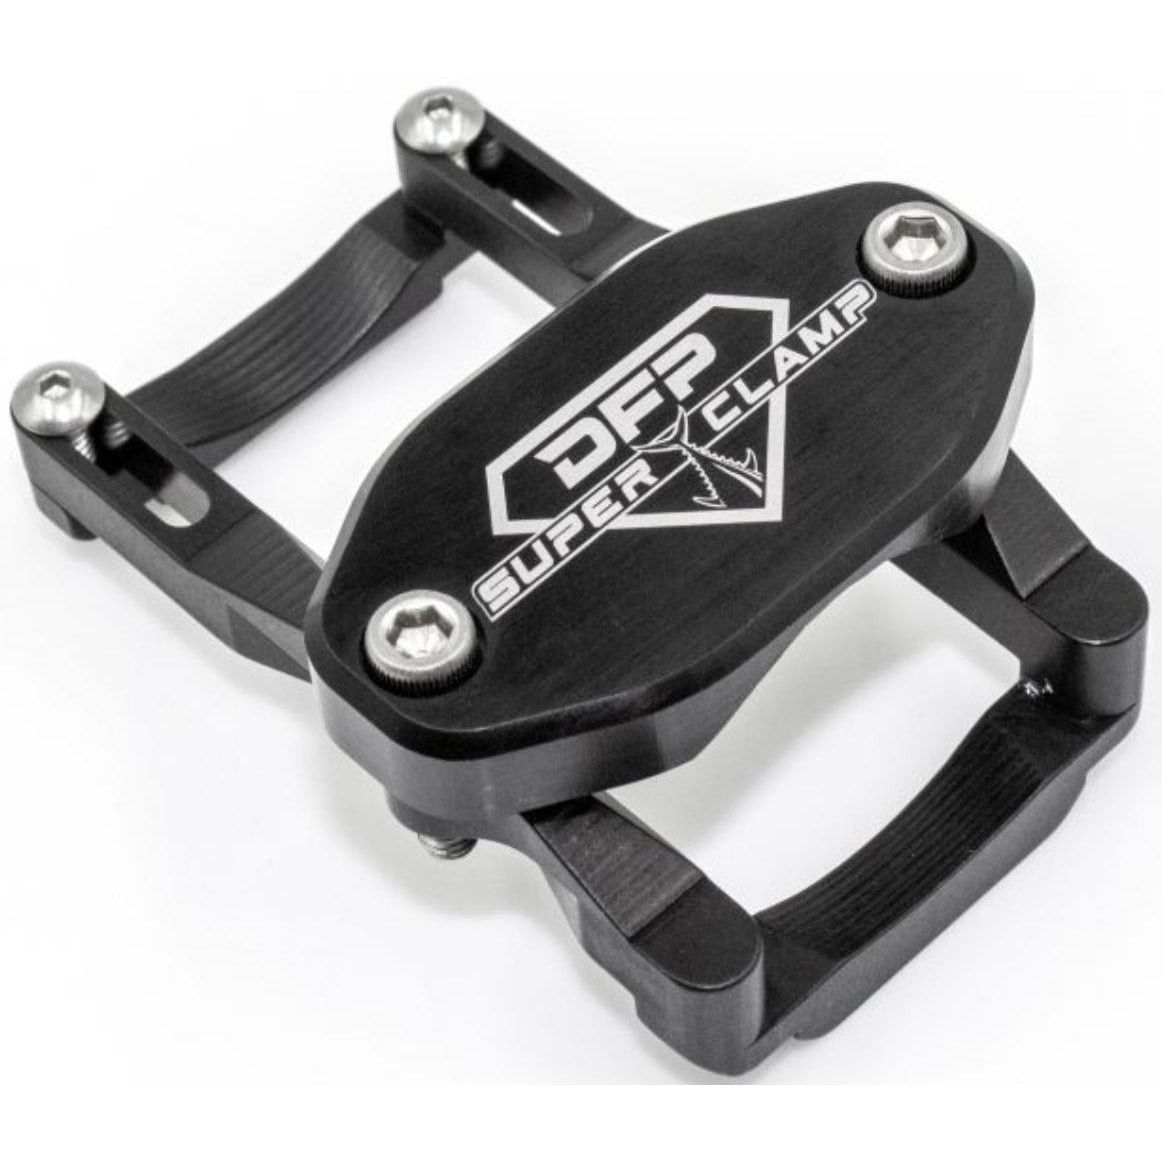  Duran's Fishing Products Mini Super Clamp, Black : Sports &  Outdoors